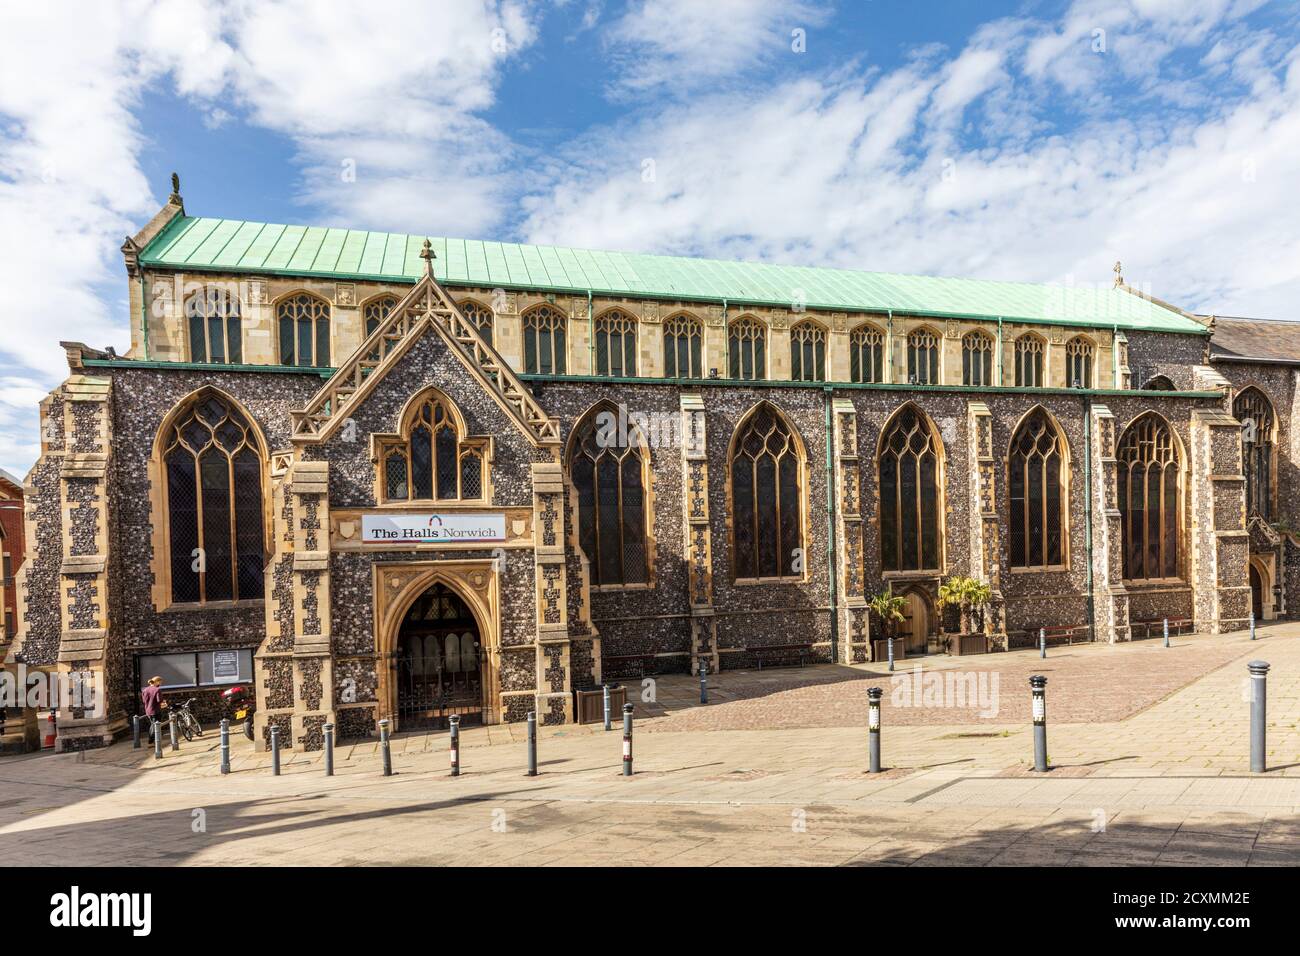 The Halls in Norwich City Centre, Norfolk. A complete medieval friary complex dating from the 14th Century, now used as an events venue. Stock Photo